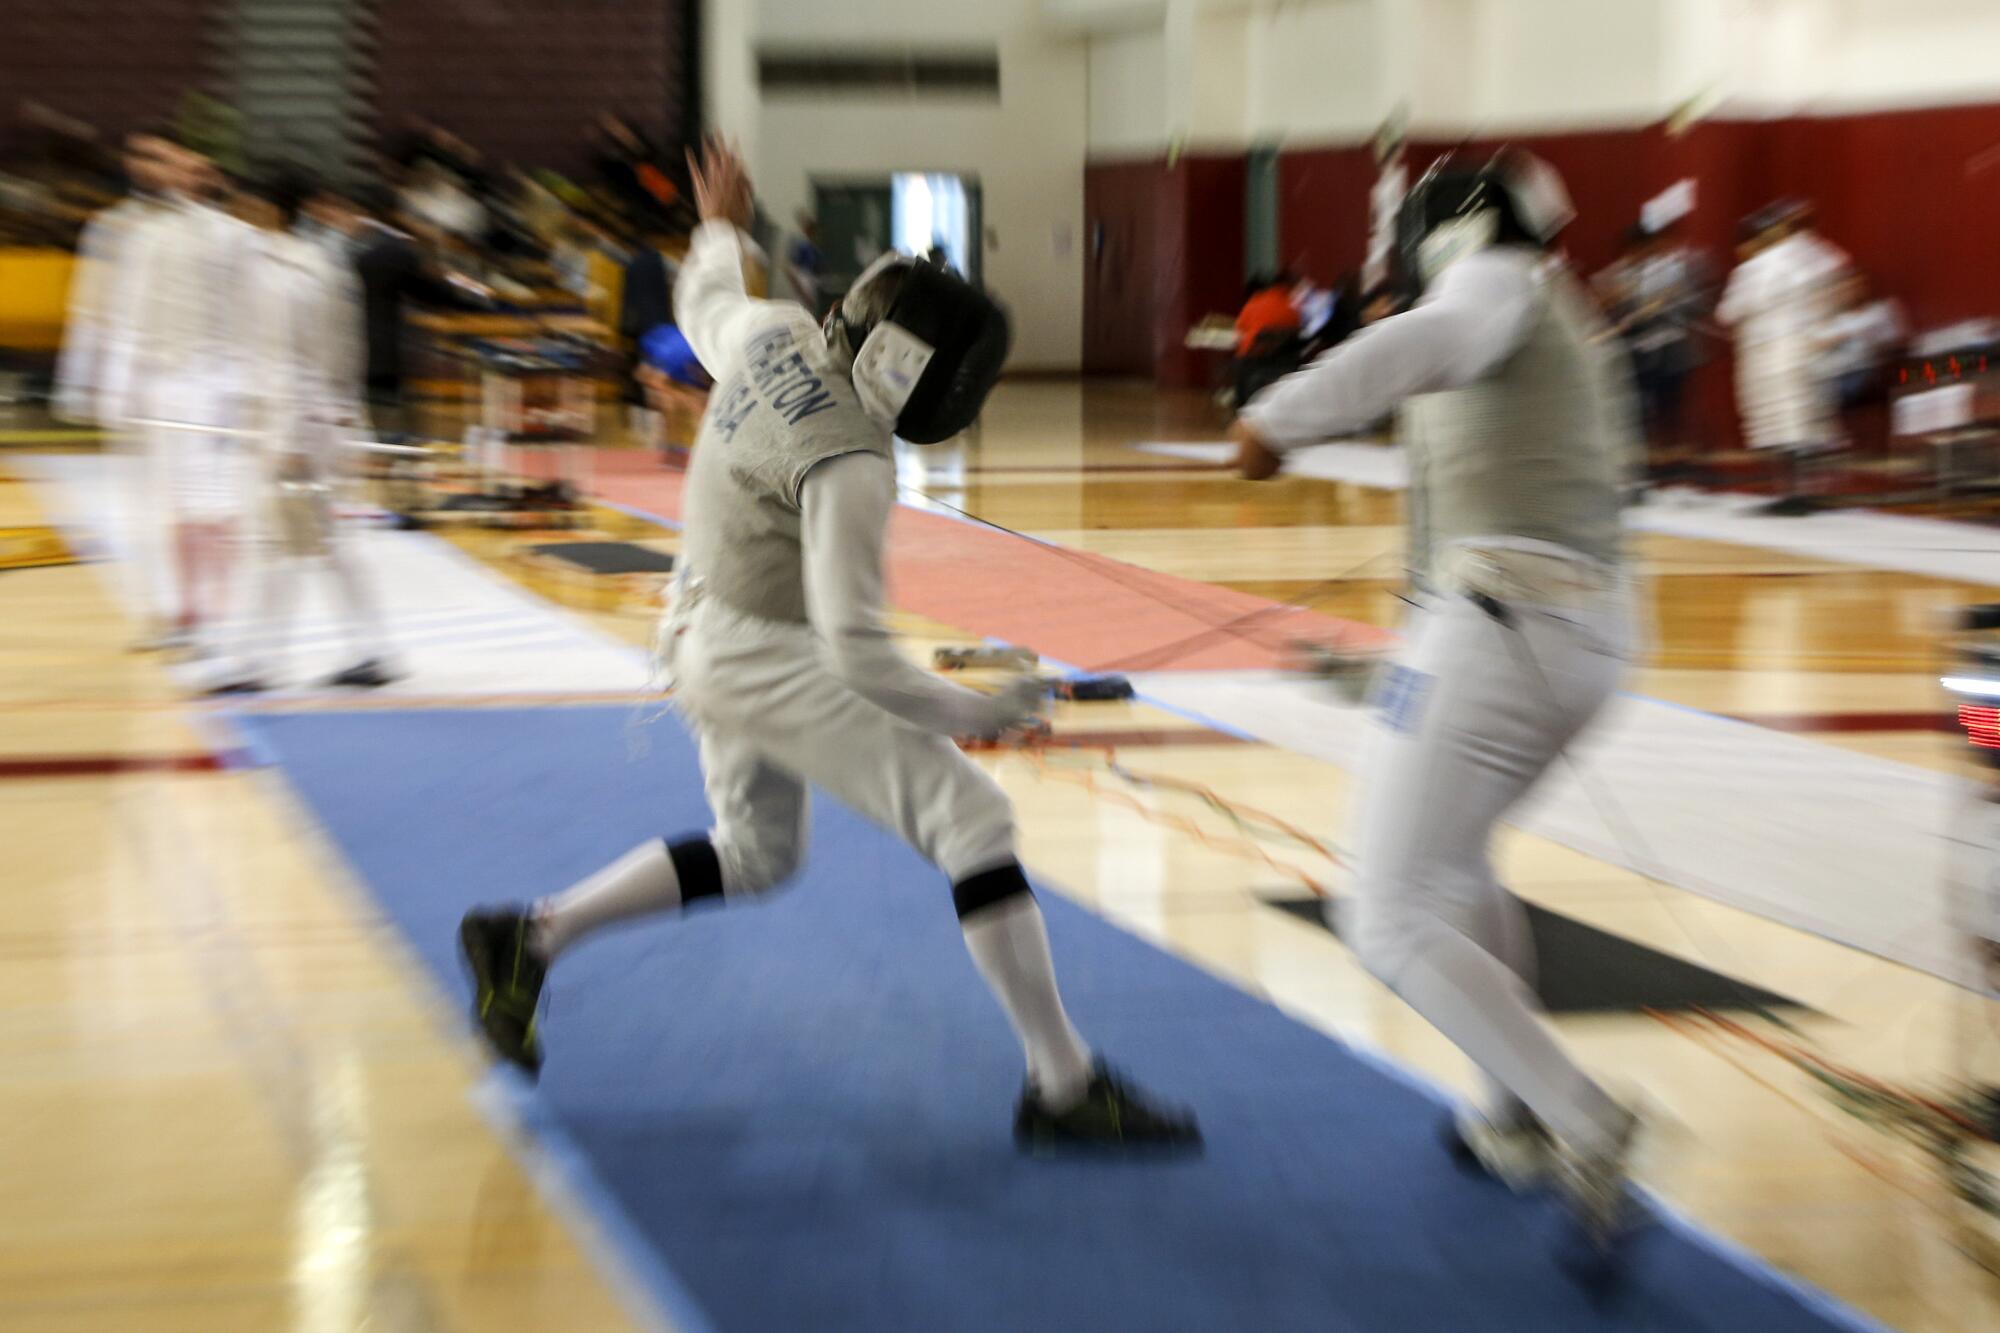 David Wharton competes against another fencer in the senior foil event.